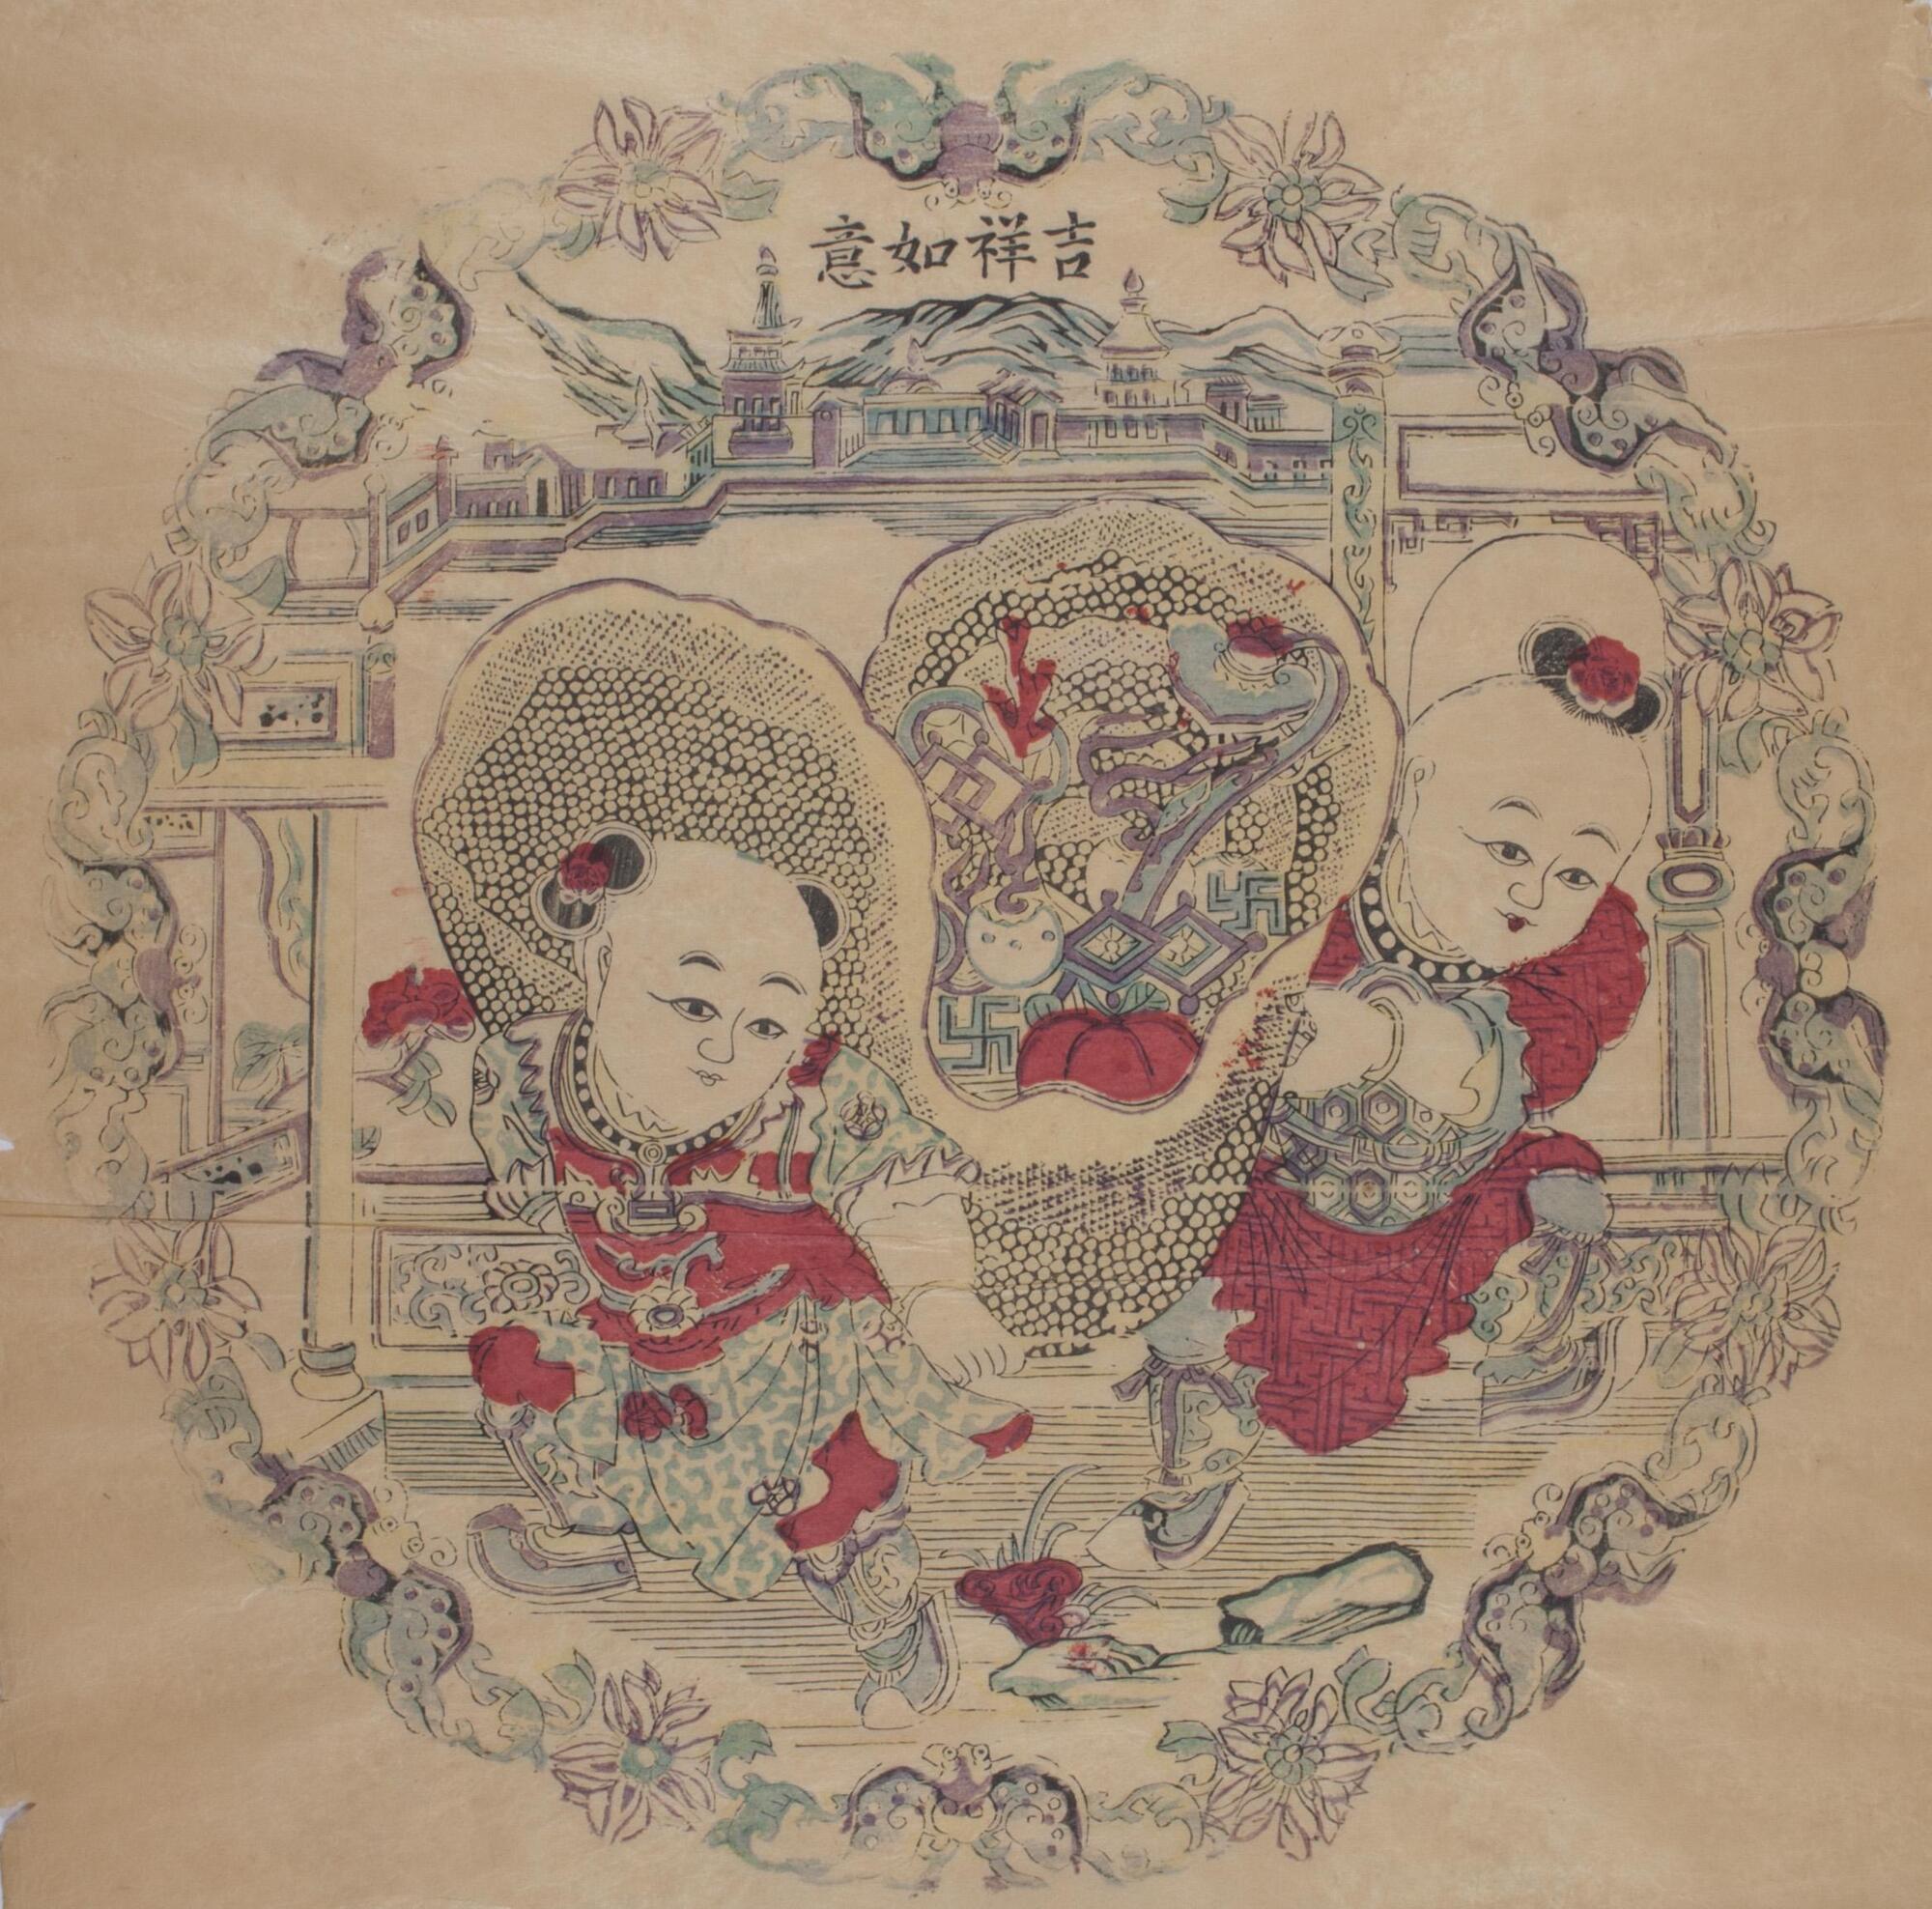 This print features a circular floral border and images of two child figures at play with a large bag of various toys. The children are dressed in elaborate red clothing, and there is a palace in the background.&nbsp;